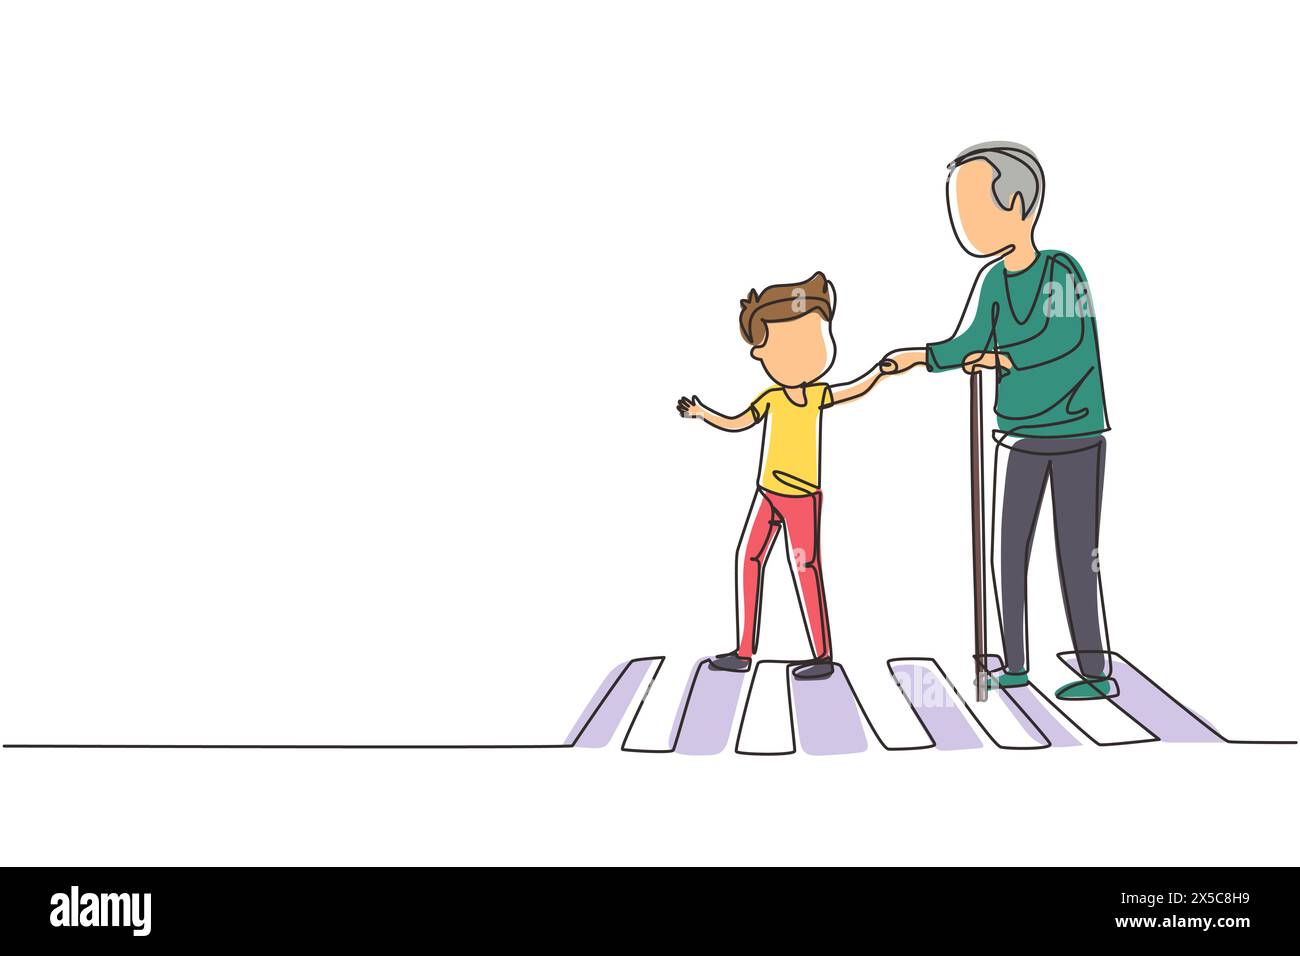 Single continuous line drawing happy boy helps grandfather cross road. Courteous kind kid taking old man across road, holding hand. Manners and respec Stock Vector